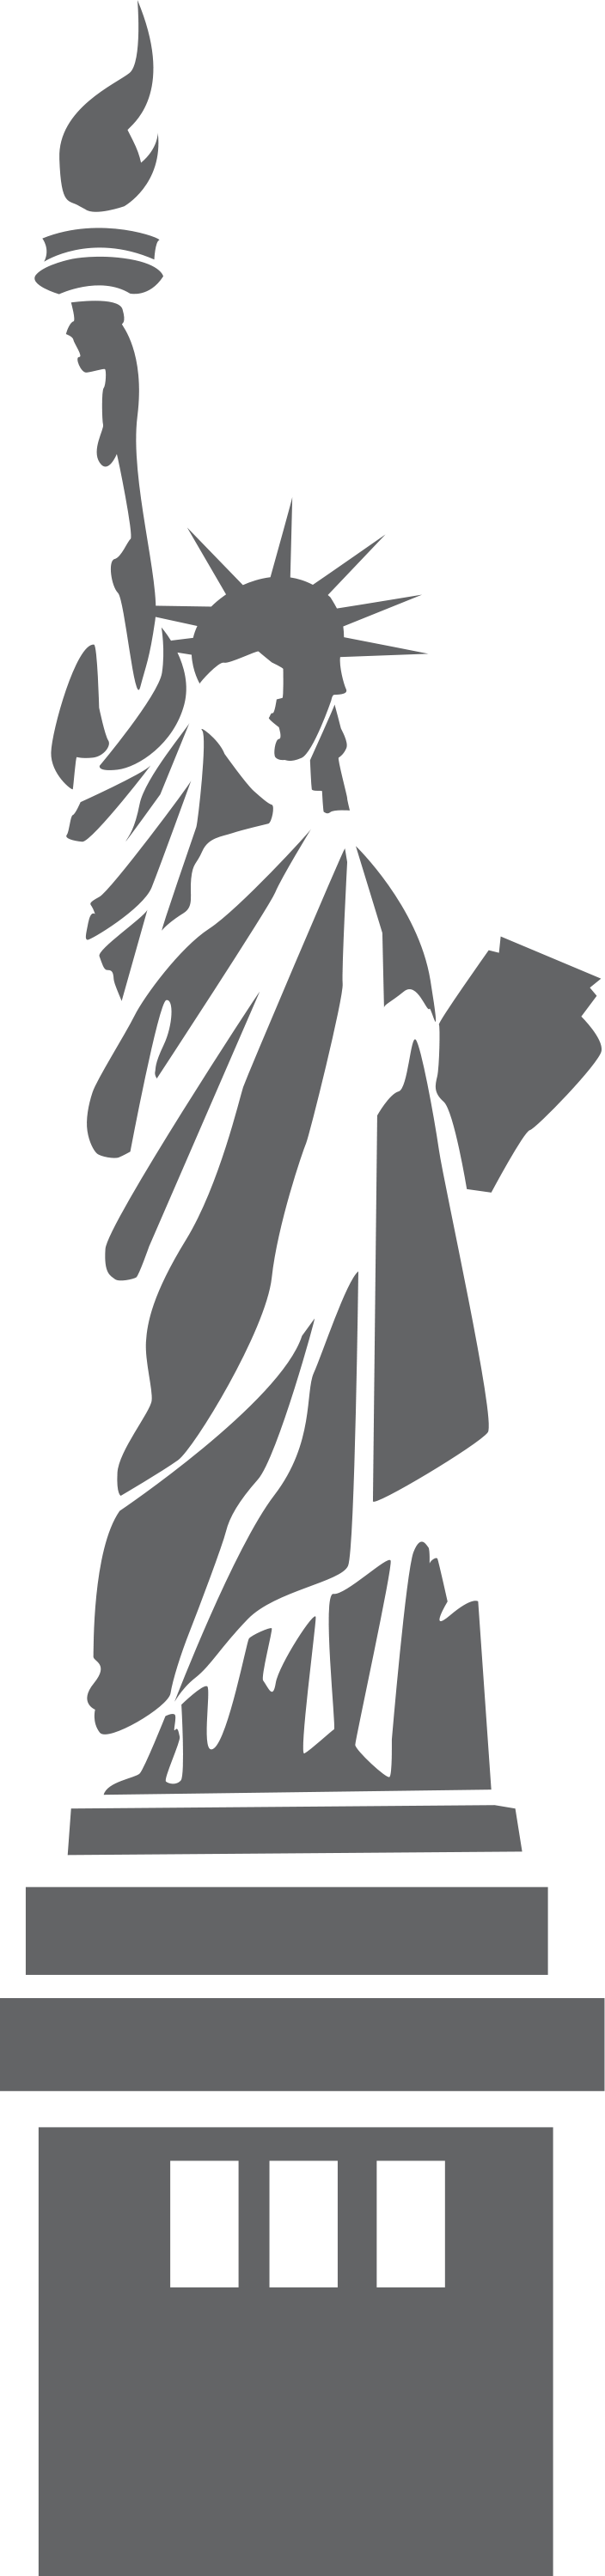 Clipart park statue. Illustration of the liberty